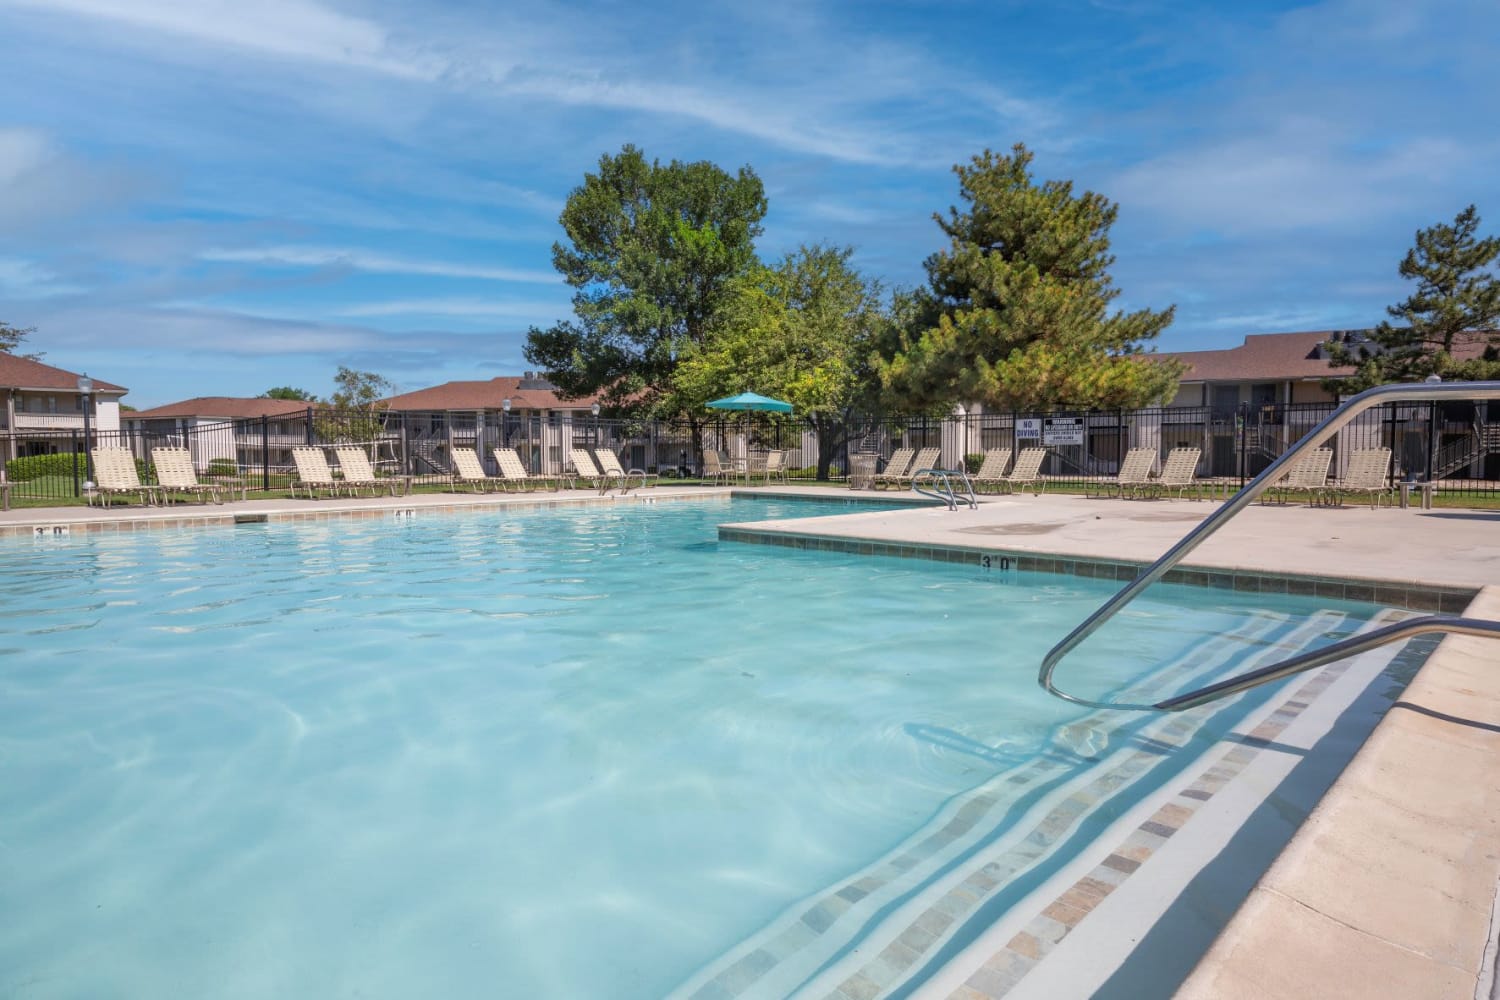 Enjoy having access to a large swimming pool at Wasatch Club Apartments in Midvale, Utah